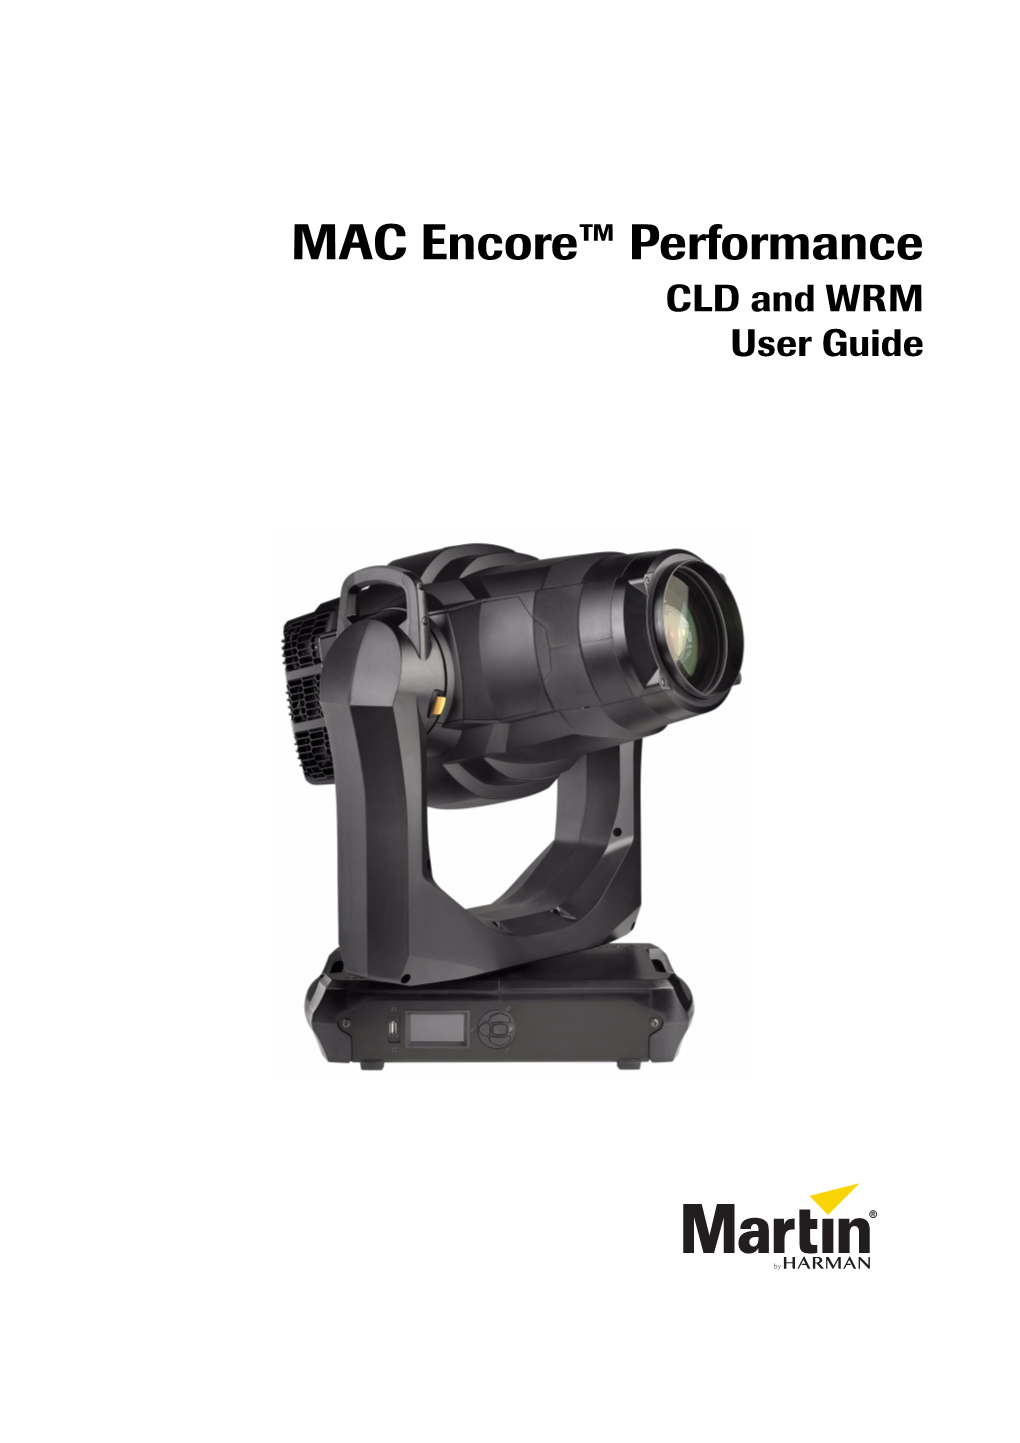 MAC Encore™ Performance CLD and WRM User Guide User Documentation Update Information Any Important Changes in the MAC Encore Performance User Guide Are Listed Below